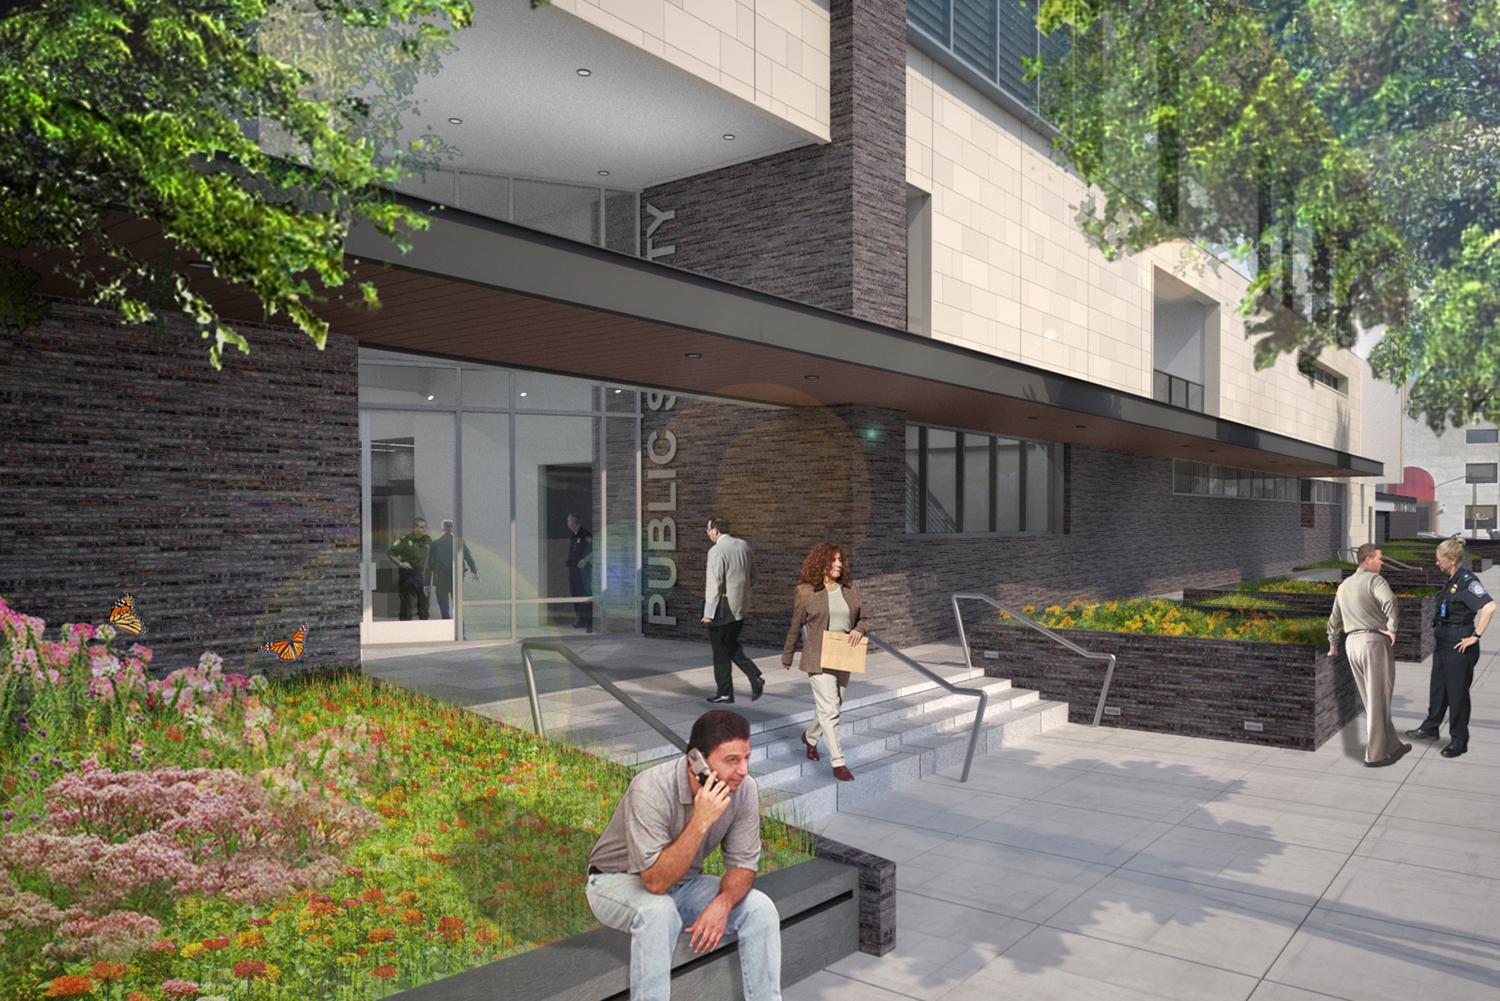 Palo Alto Public Safety Building entry, rendering by Ross Drulis Cusenbery Architecture